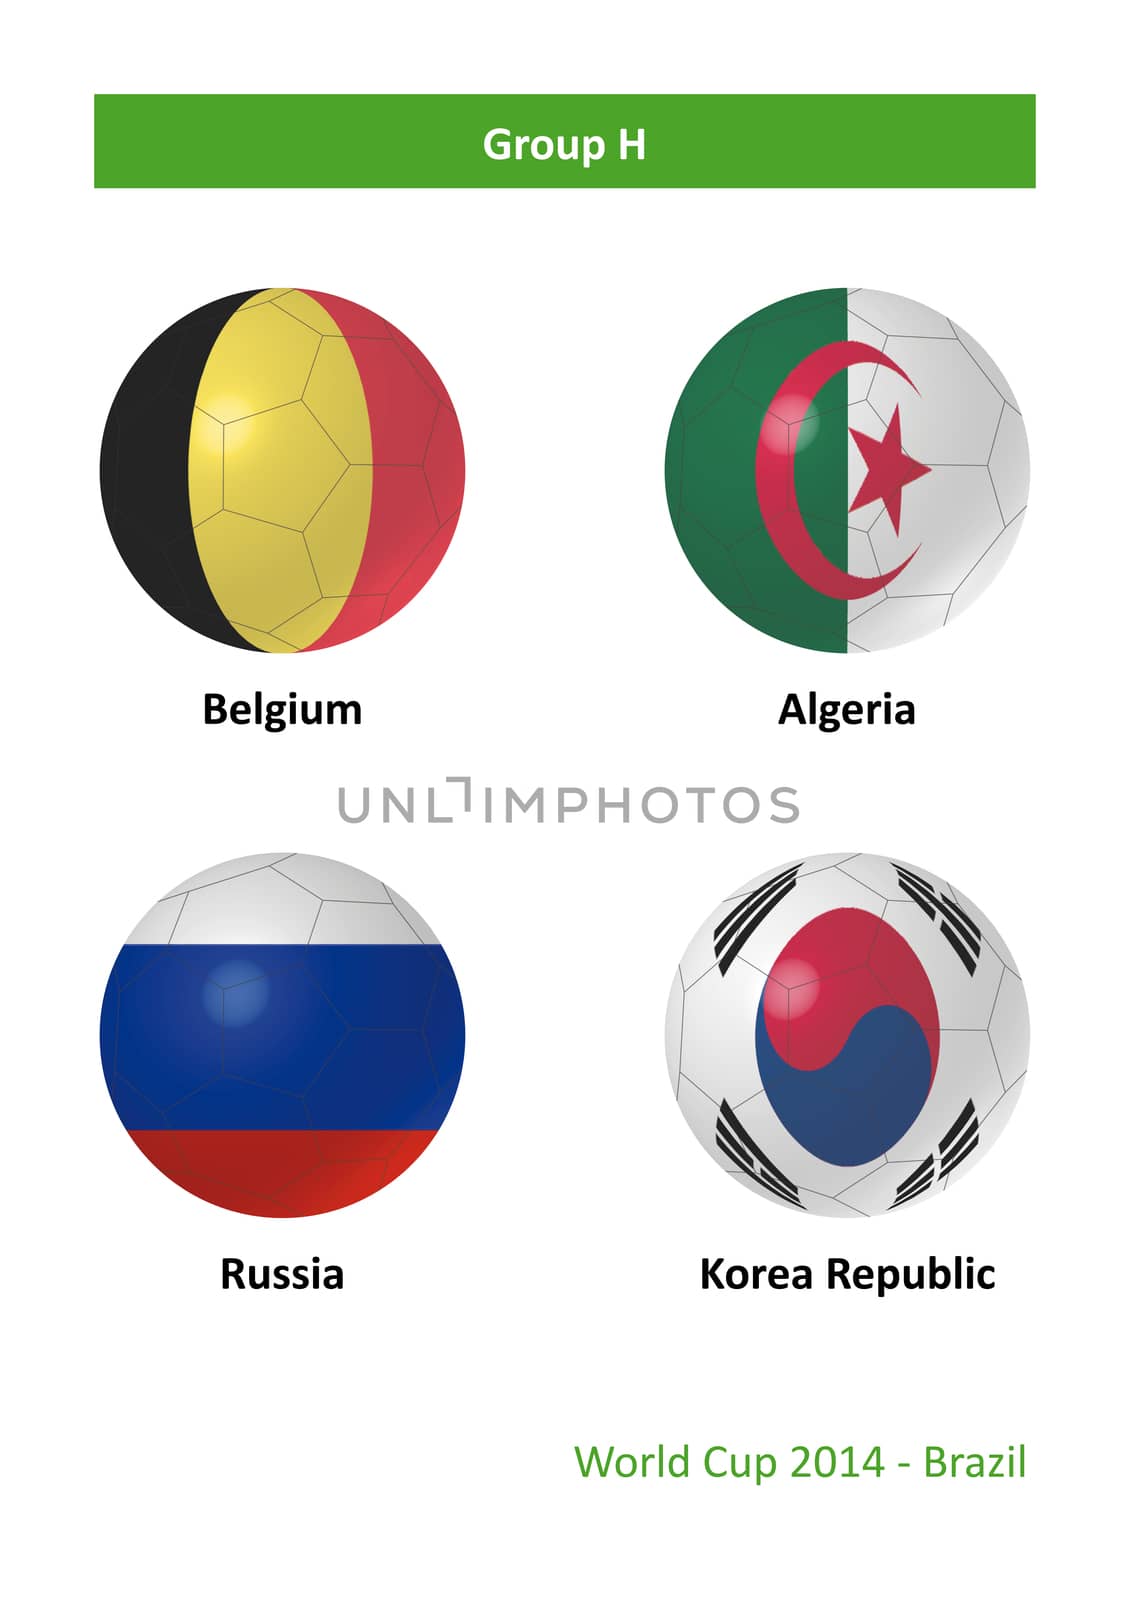 3D soccer balls with group H country flags World Cup Football Brazil 2014